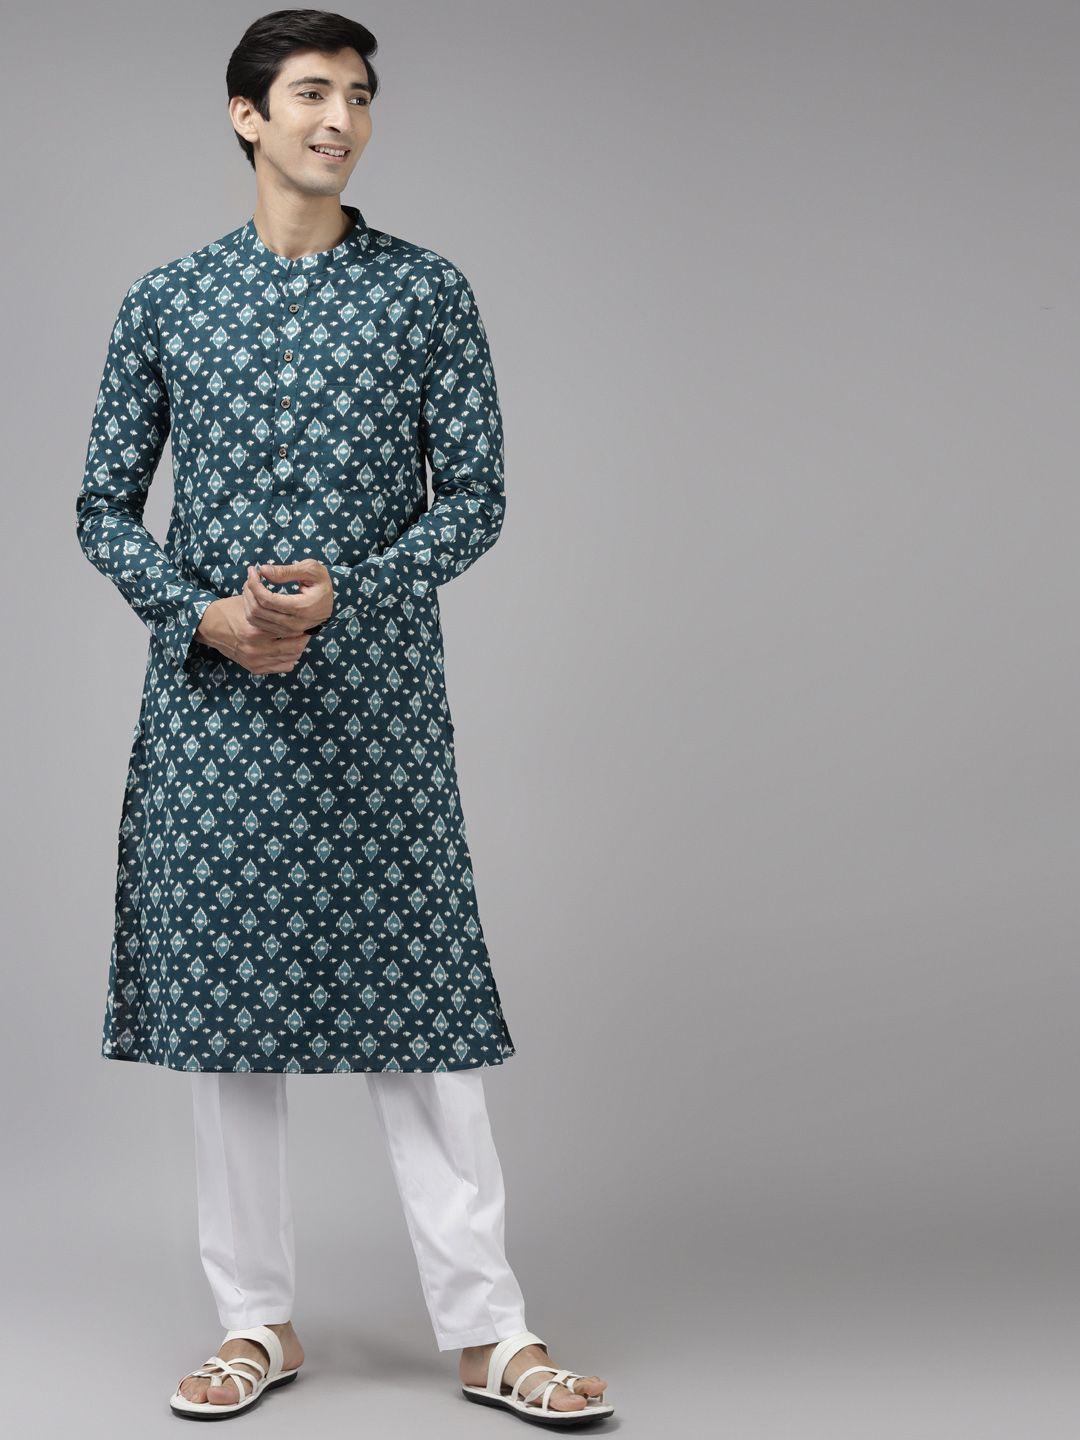 see designs men teal blue ethnic motifs printed pure cotton kurta with trousers